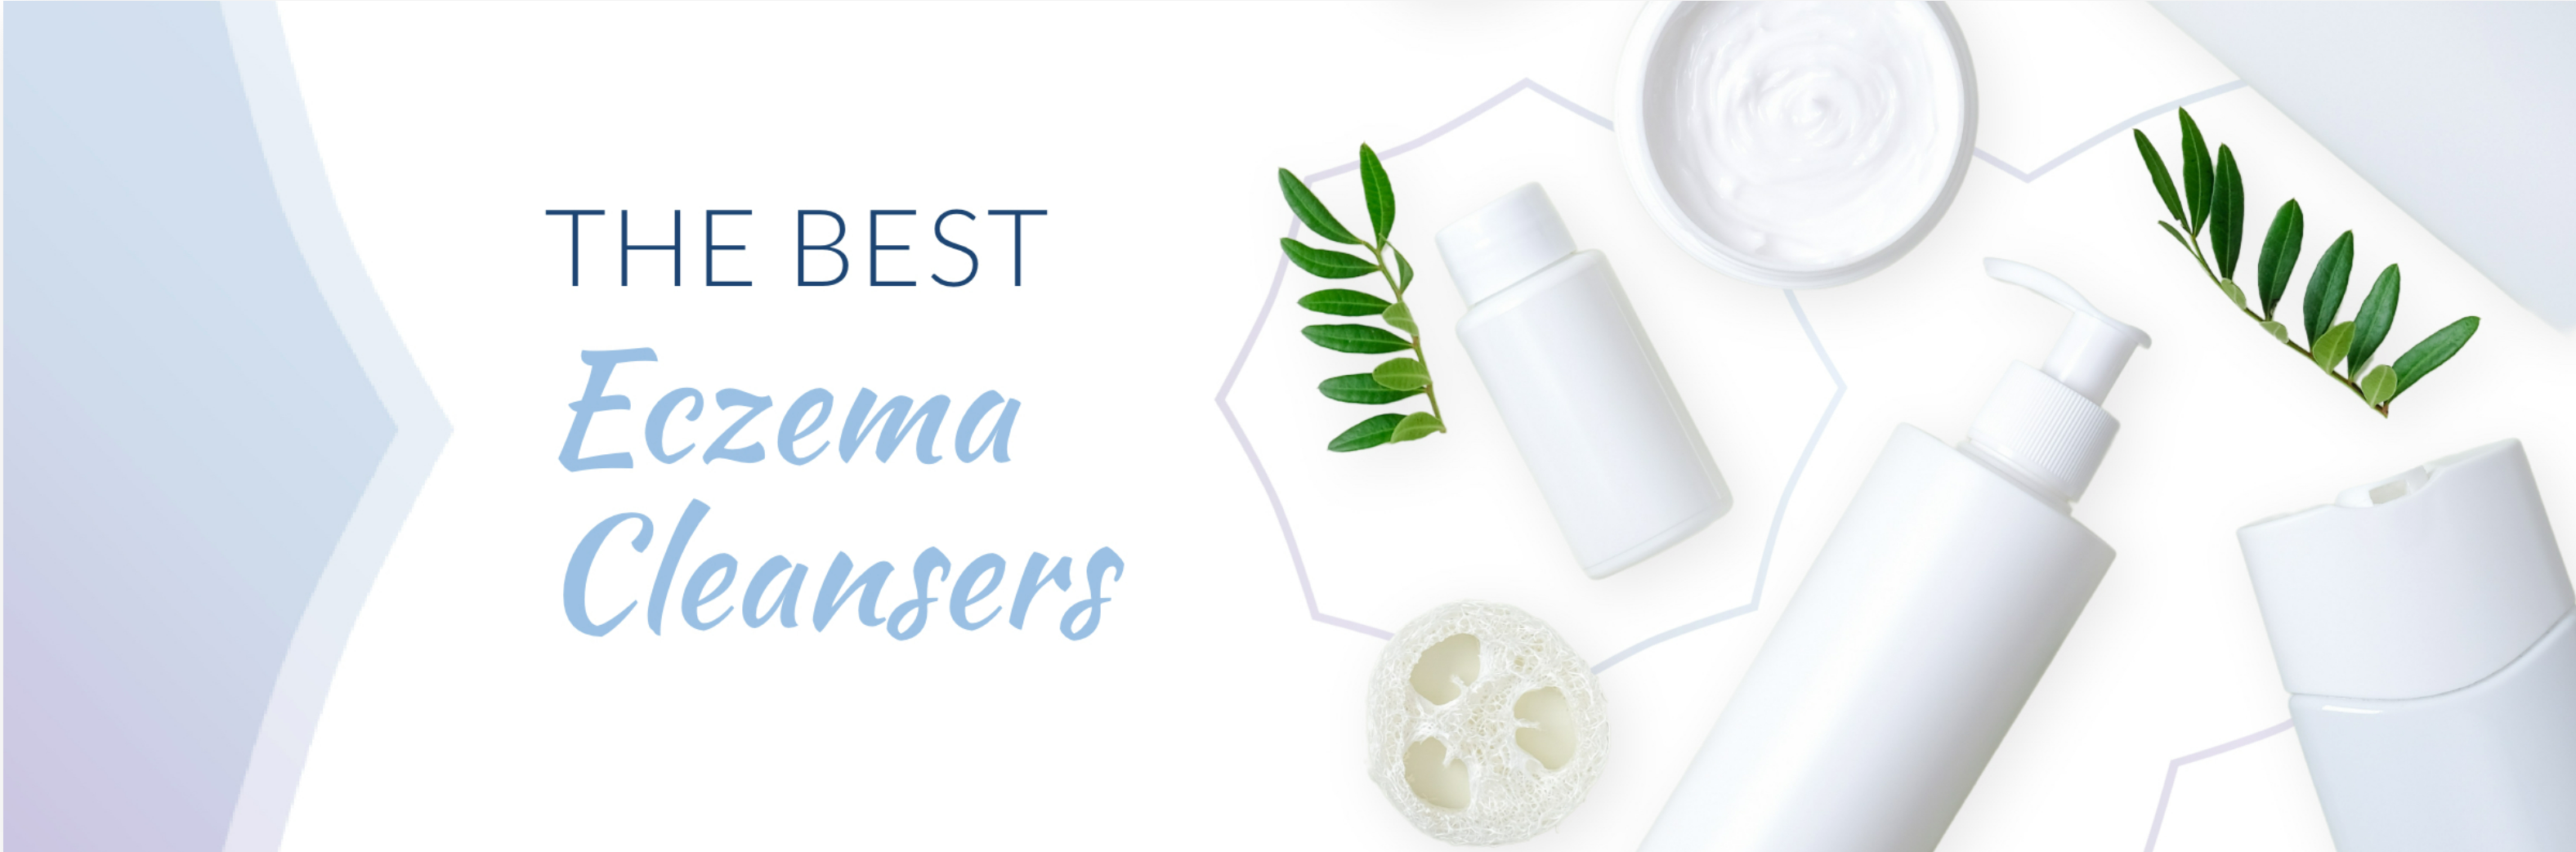 the best eczema cleansers in text wiht bottles of skin care products around the text